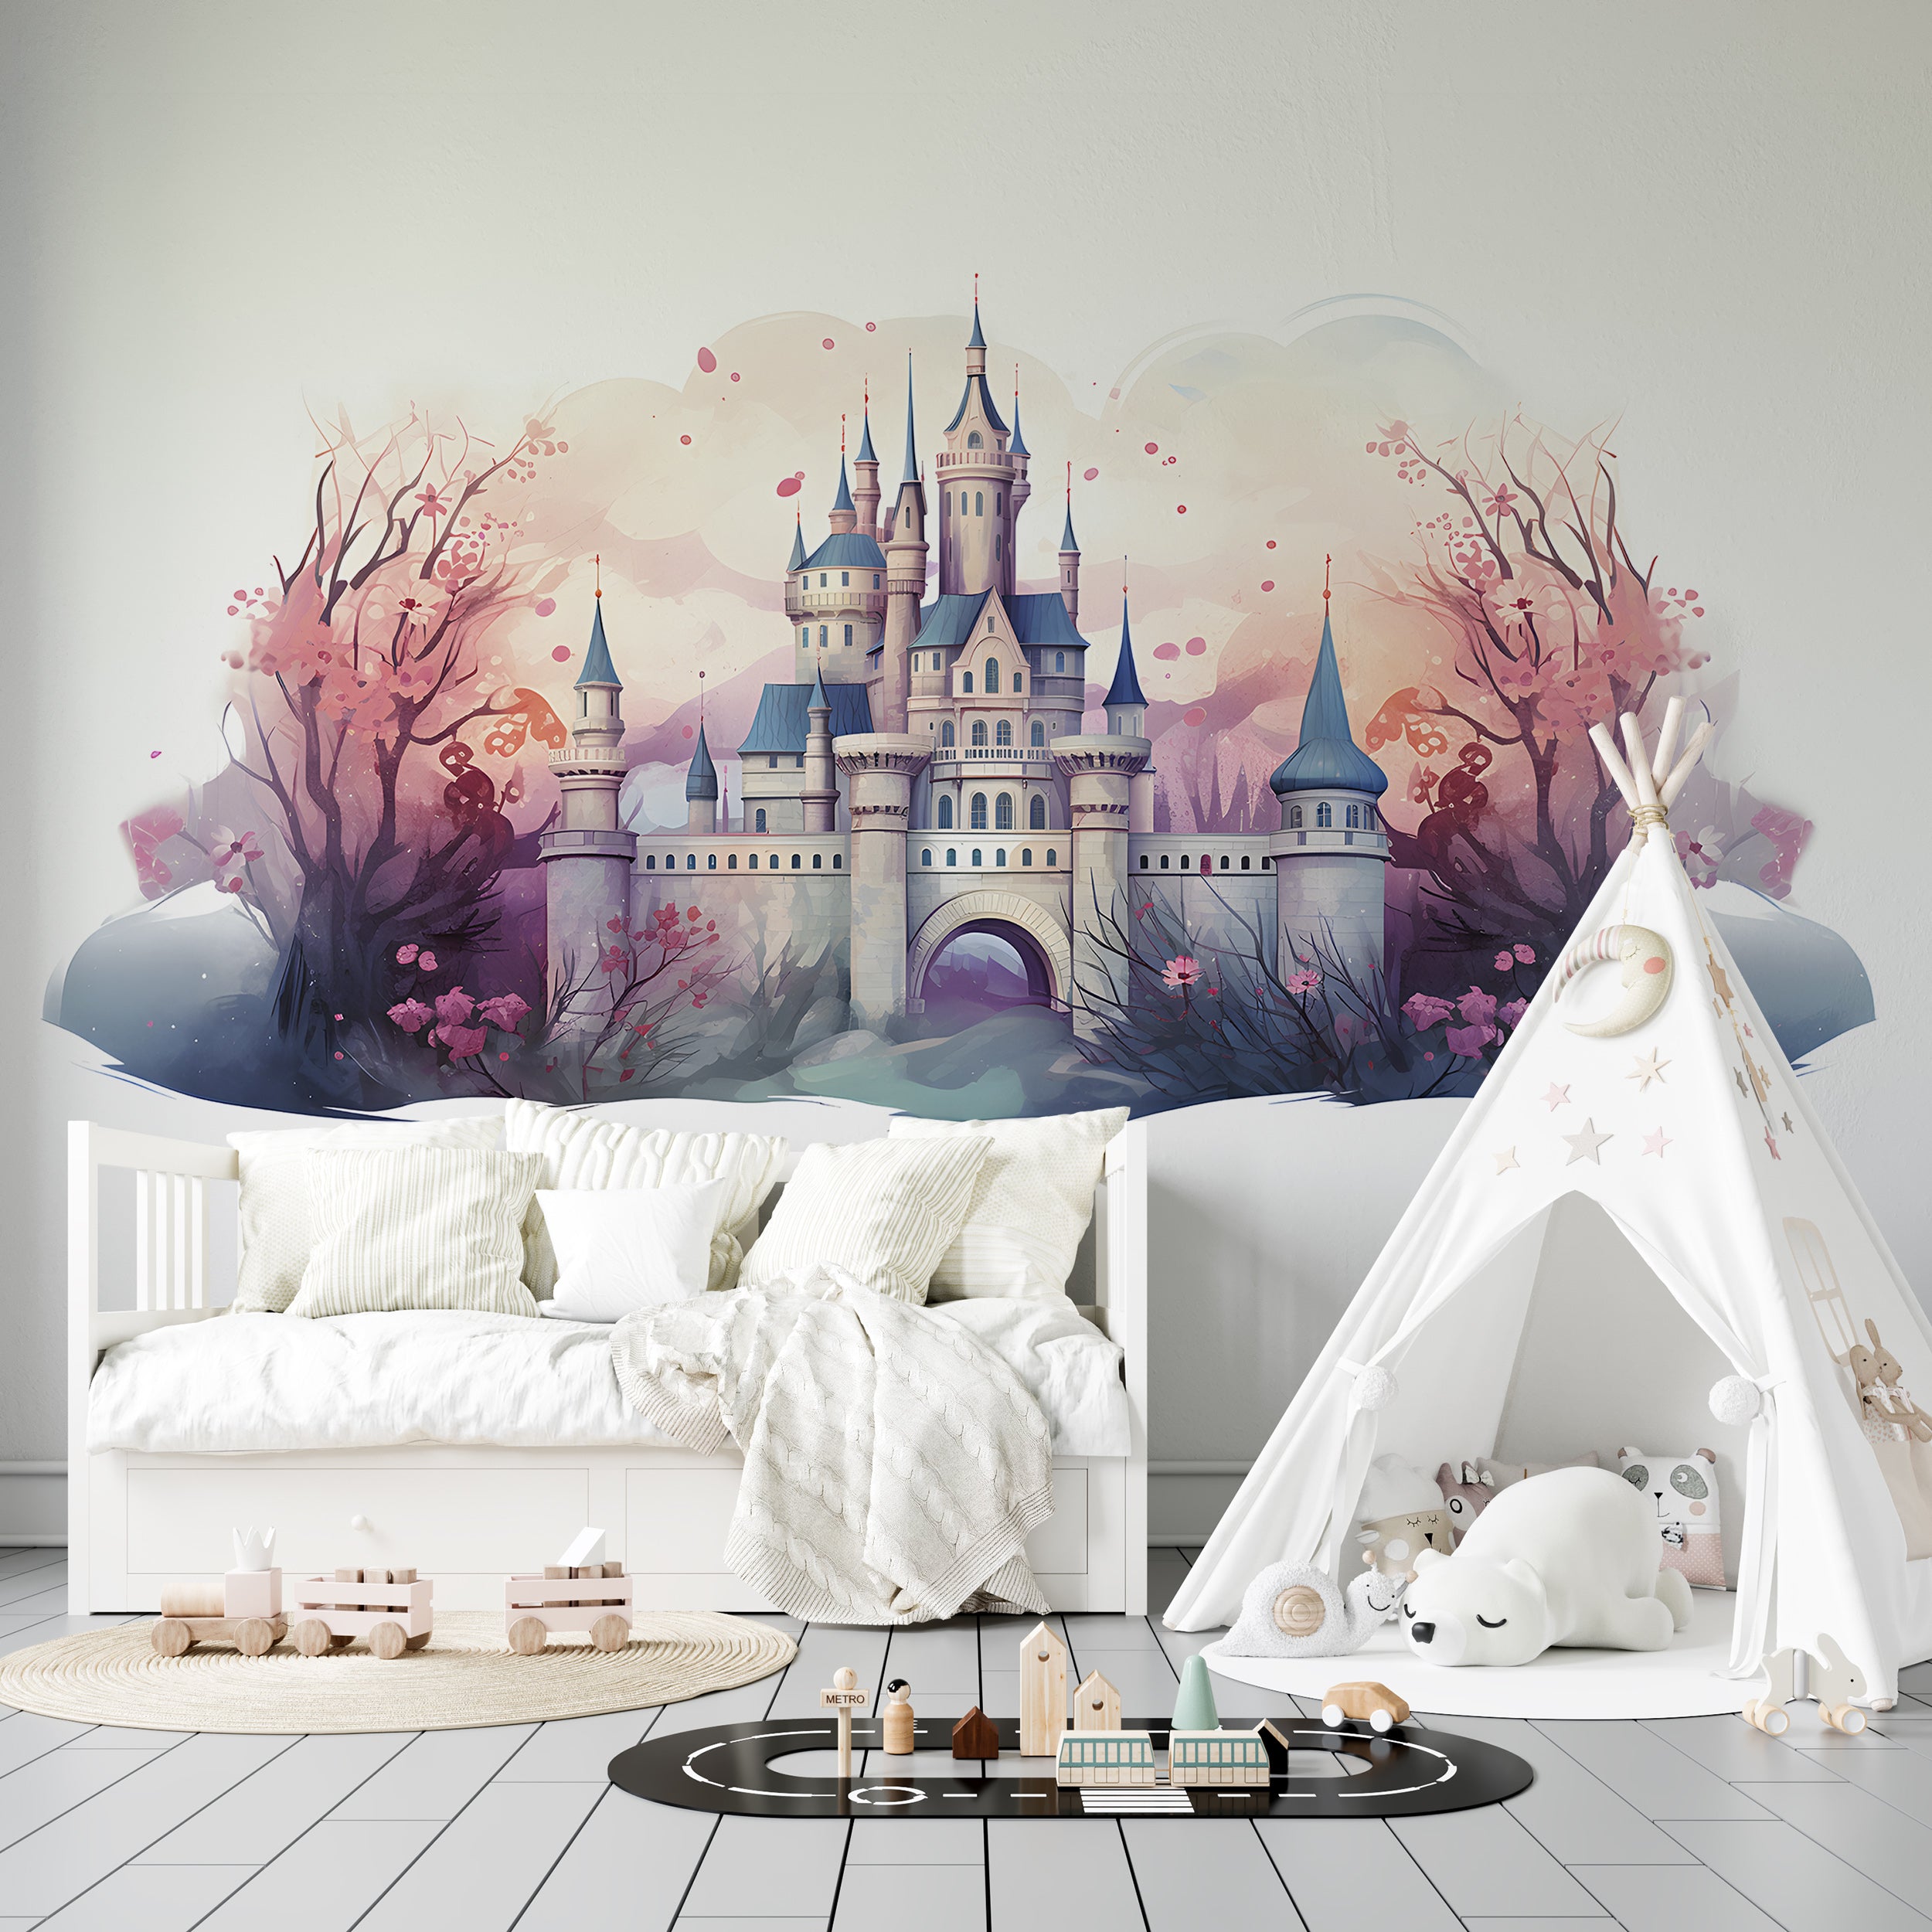 Whimsical Pink and Blue Castle Theme